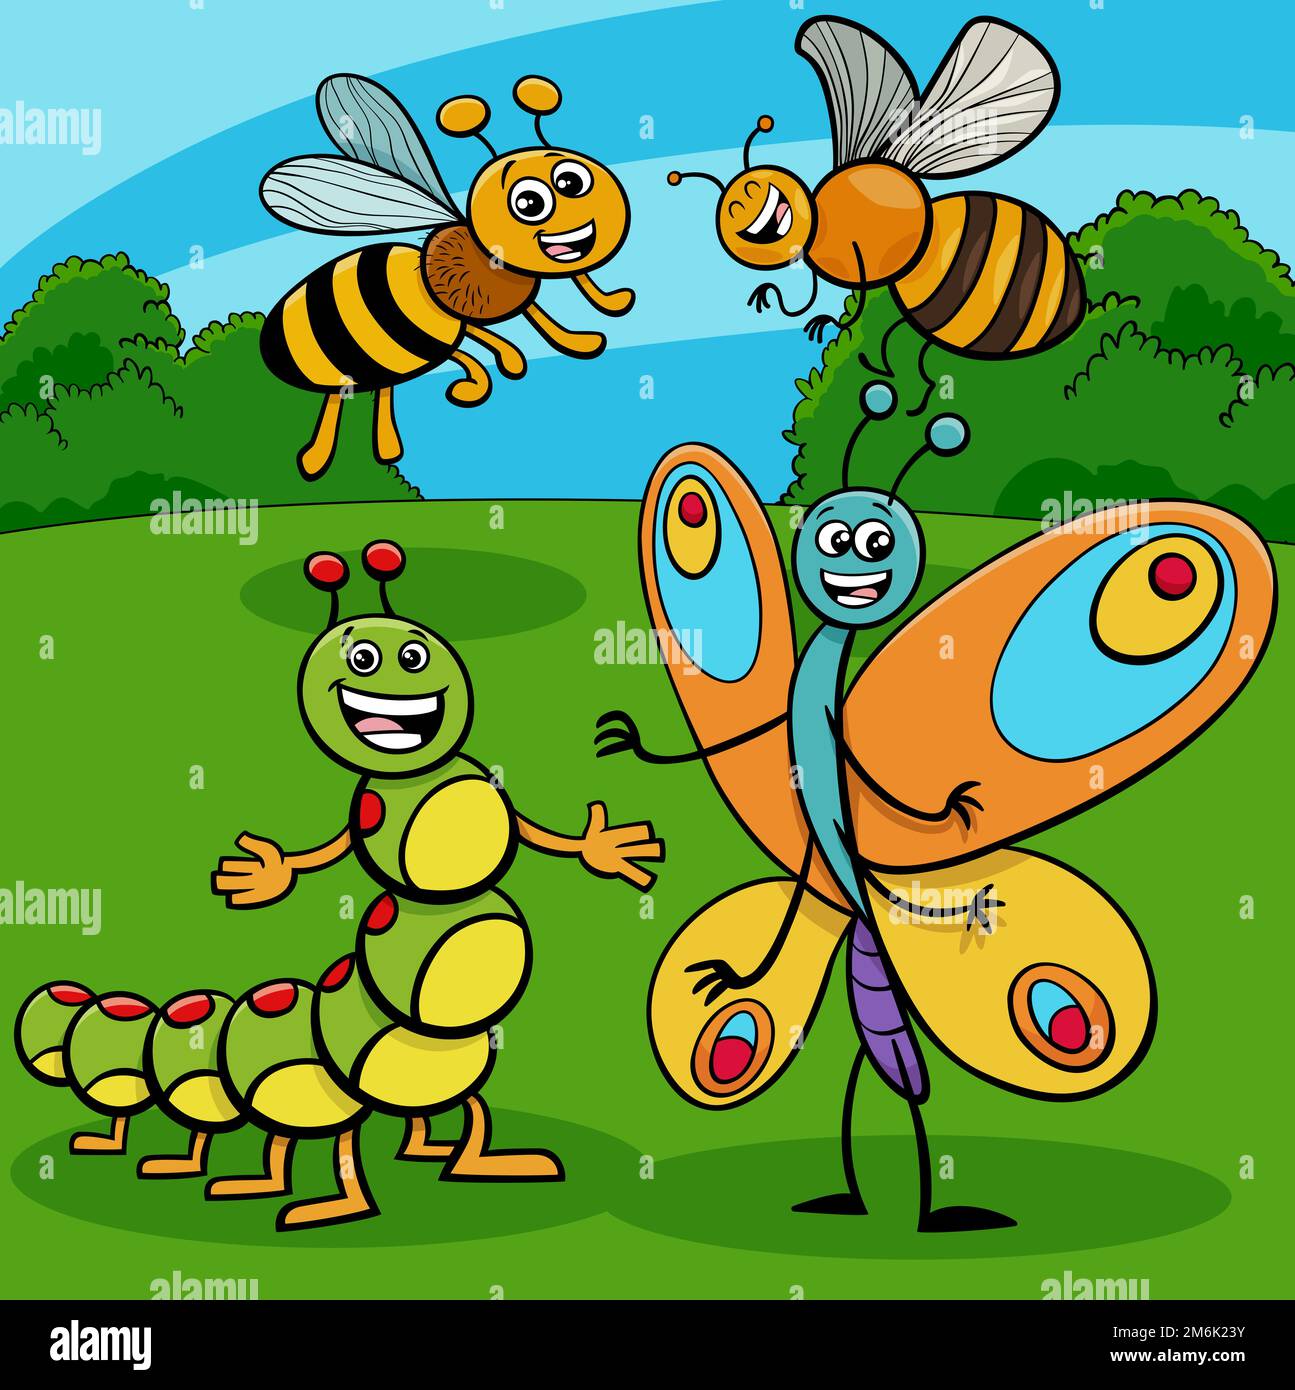 Cartoon insects funny animal characters group Stock Photo - Alamy